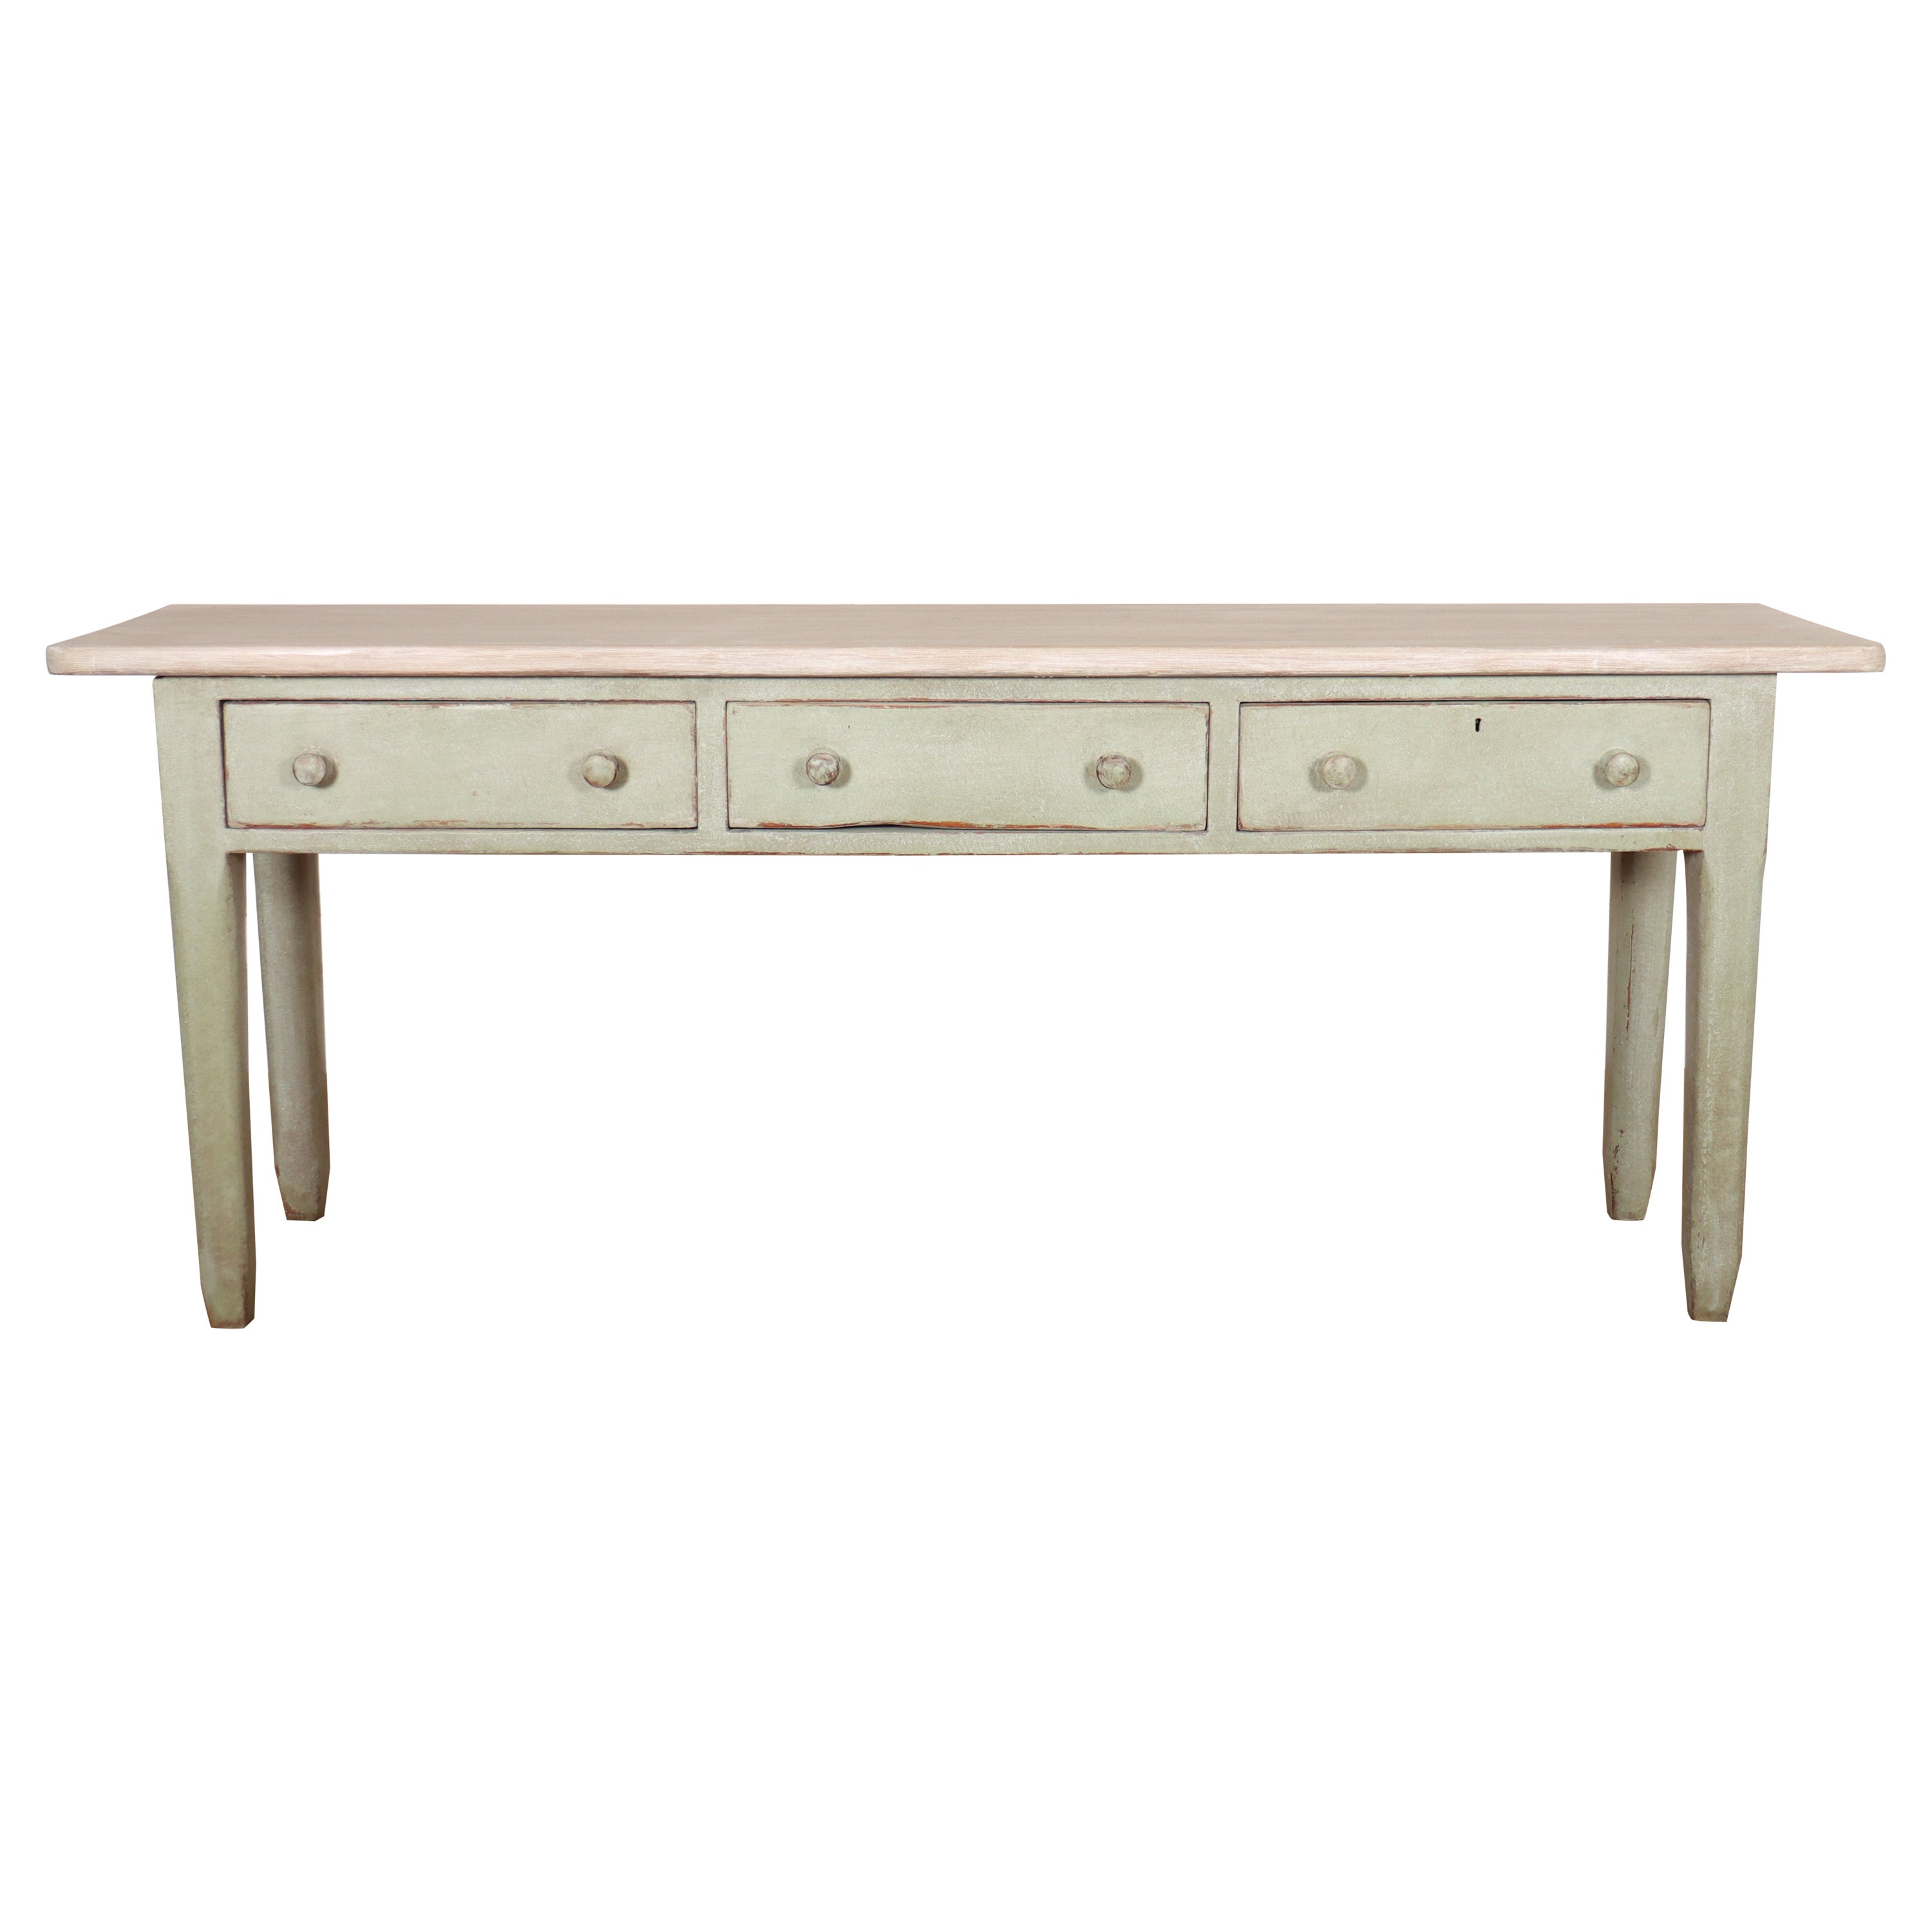 Narrow Painted Console Table